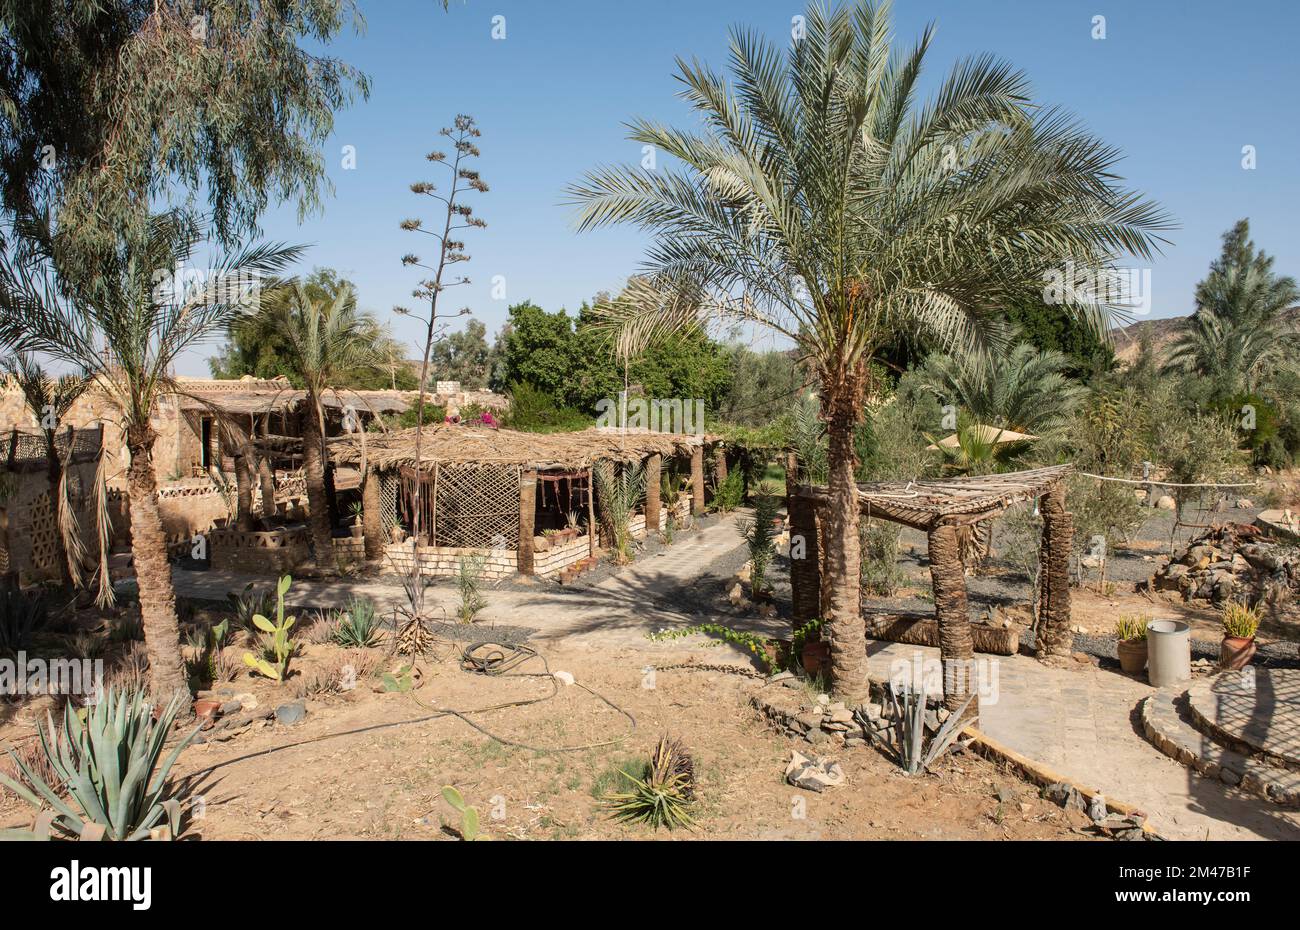 Outdoor area of rural eco lodge in egyptian villlage with desert garden and palm trees Stock Photo